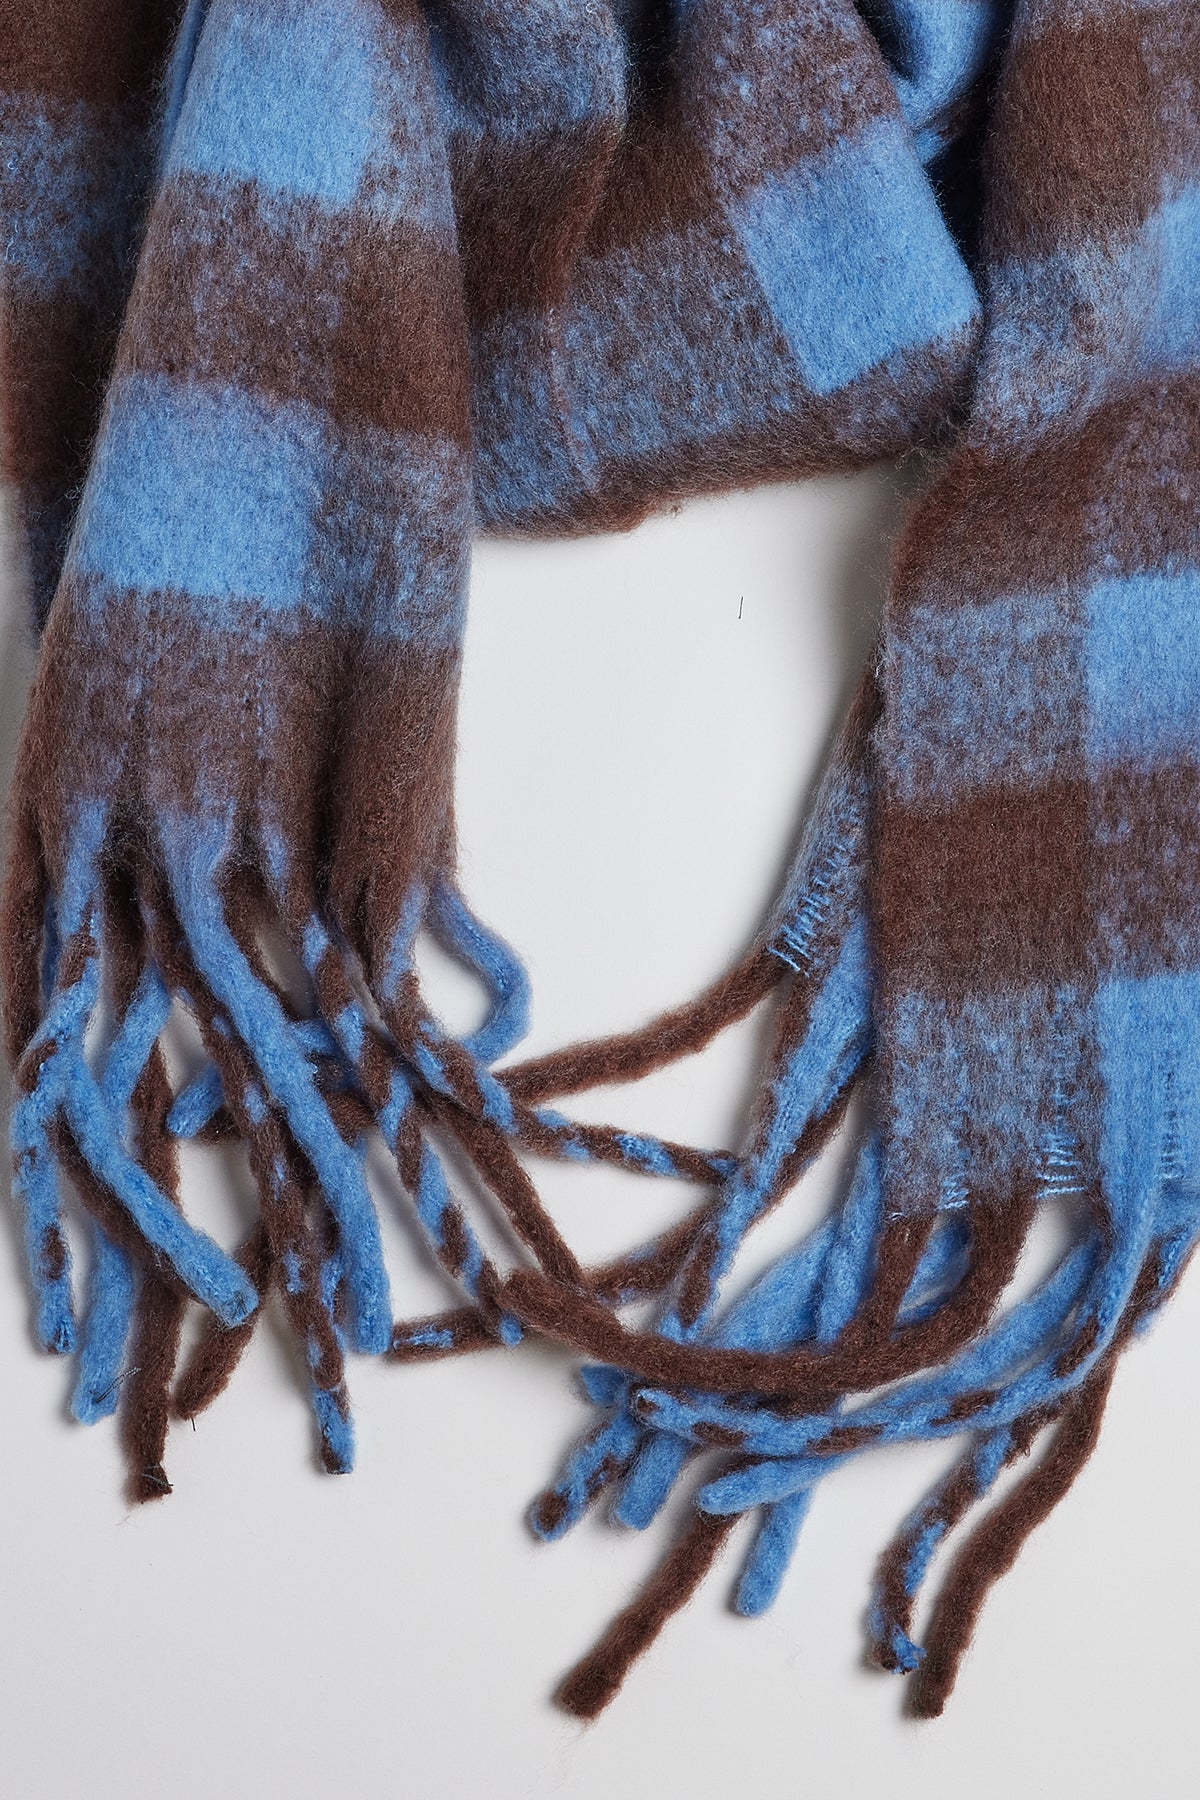 A classic Velvet by Graham & Spencer plaid scarf with fringe ends, the ELLE PLAID SCARF offers warmth and comfort in shades of blue and brown.-35211033575617